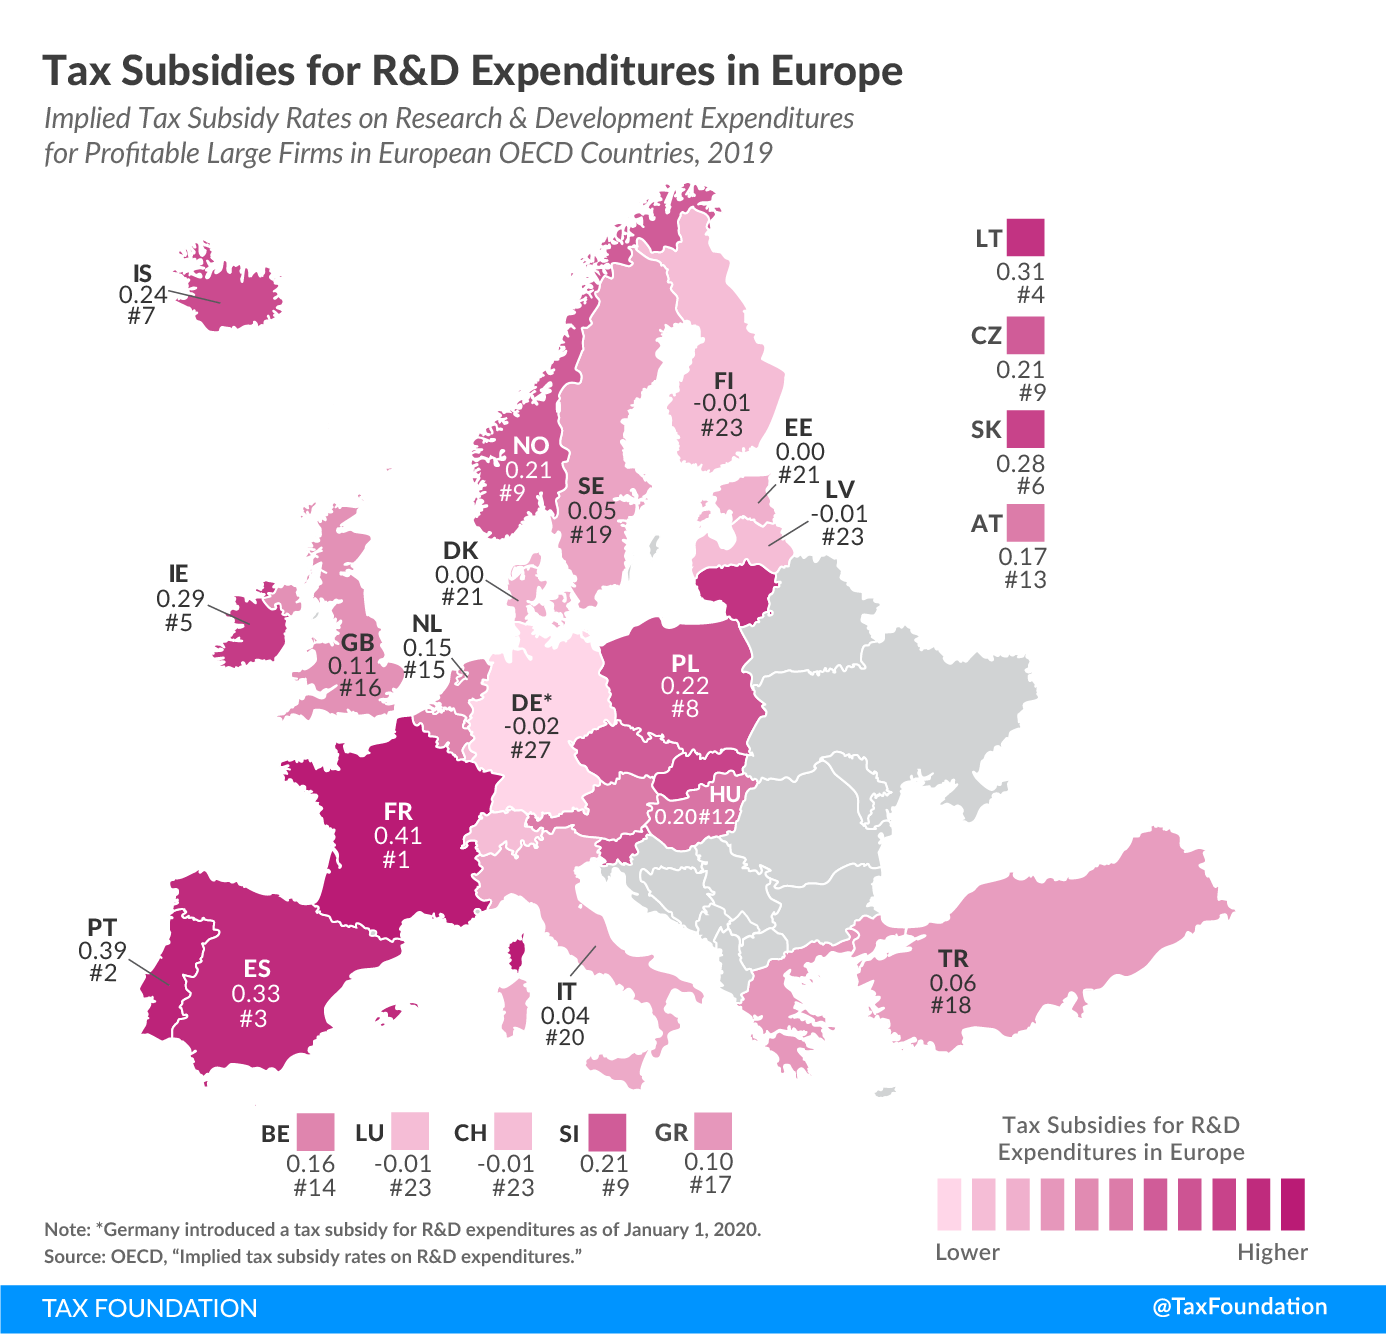 R&D Tax Incentives in European OECD Countries, Tax Subsidies for R&D Expenditures in Europe